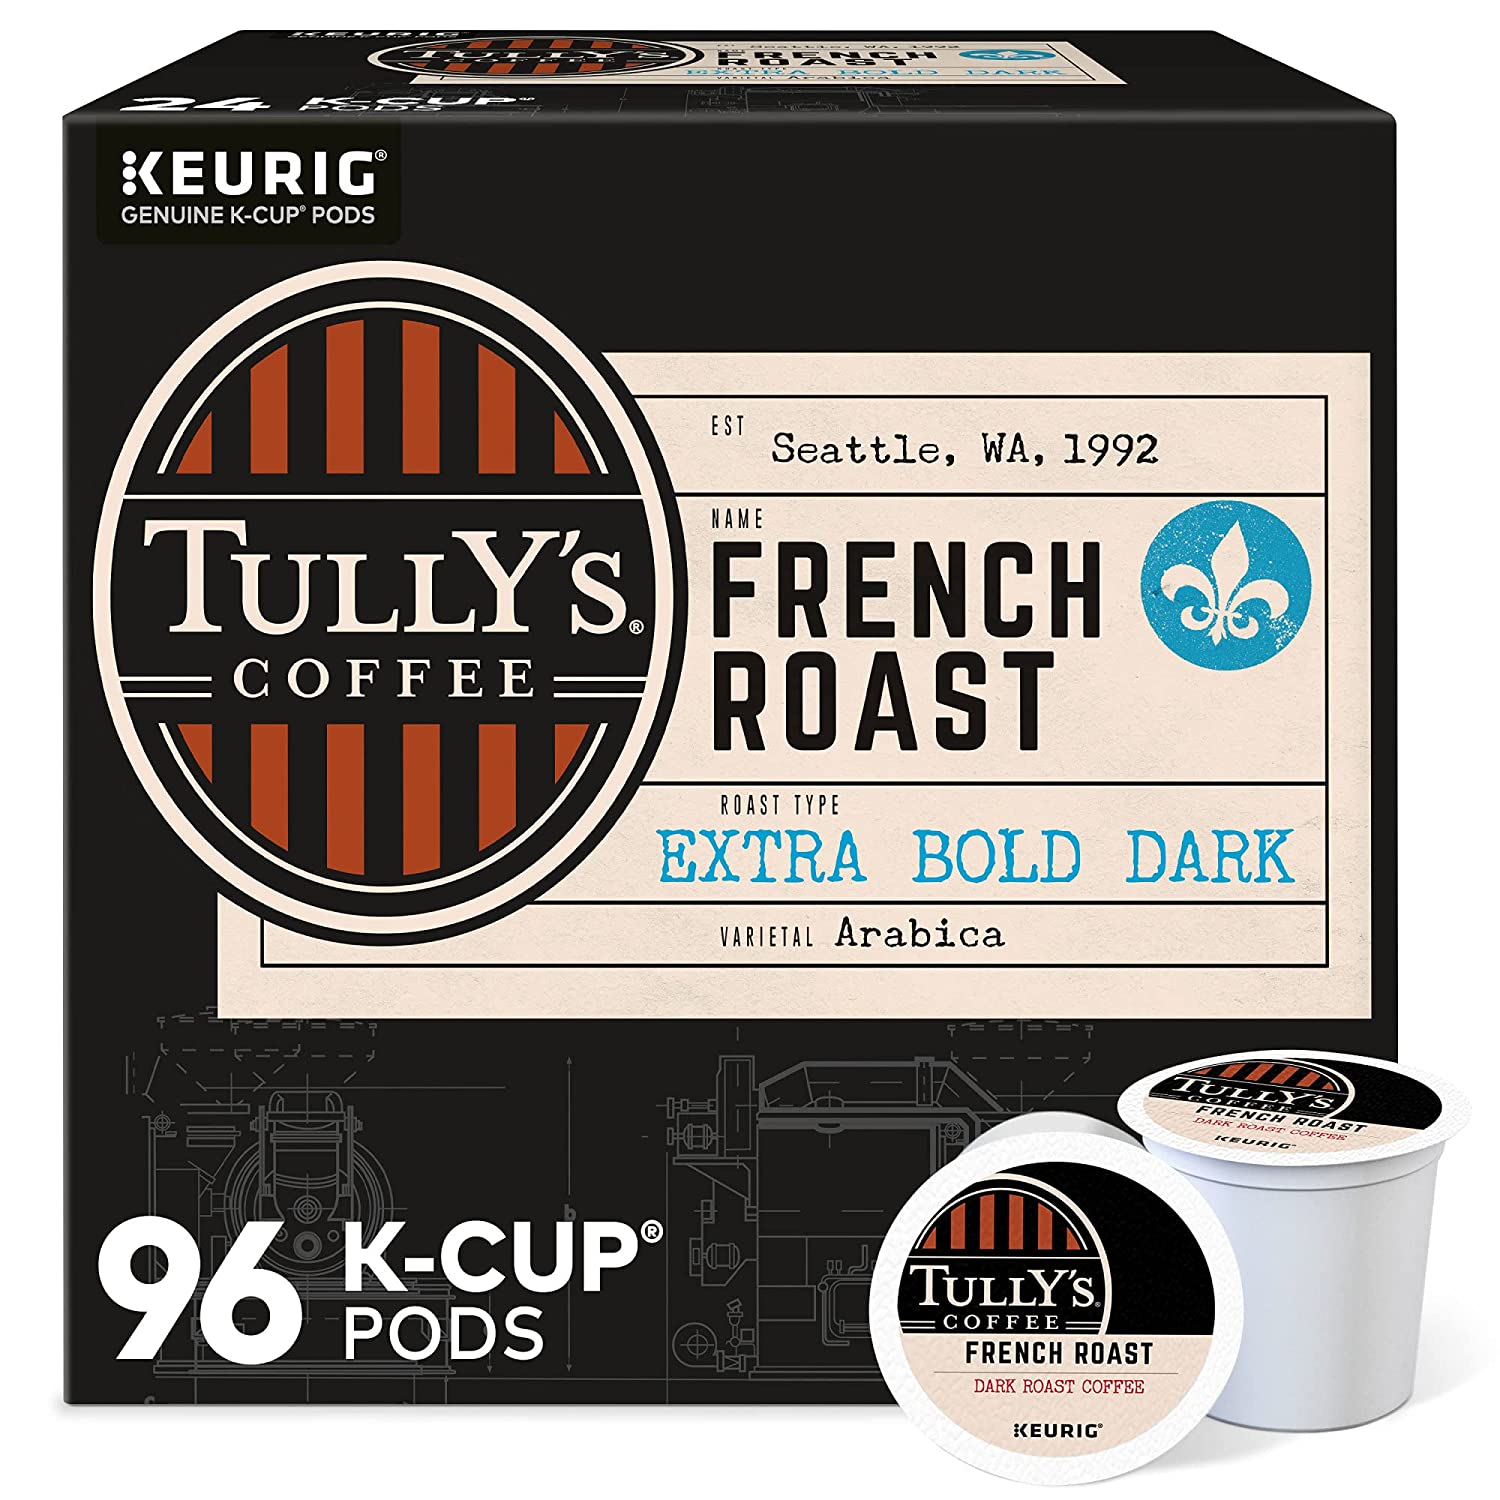 Tully's Coffee French Roast, Single-Serve Keurig K-Cup Pods, Amazon.com $17.97